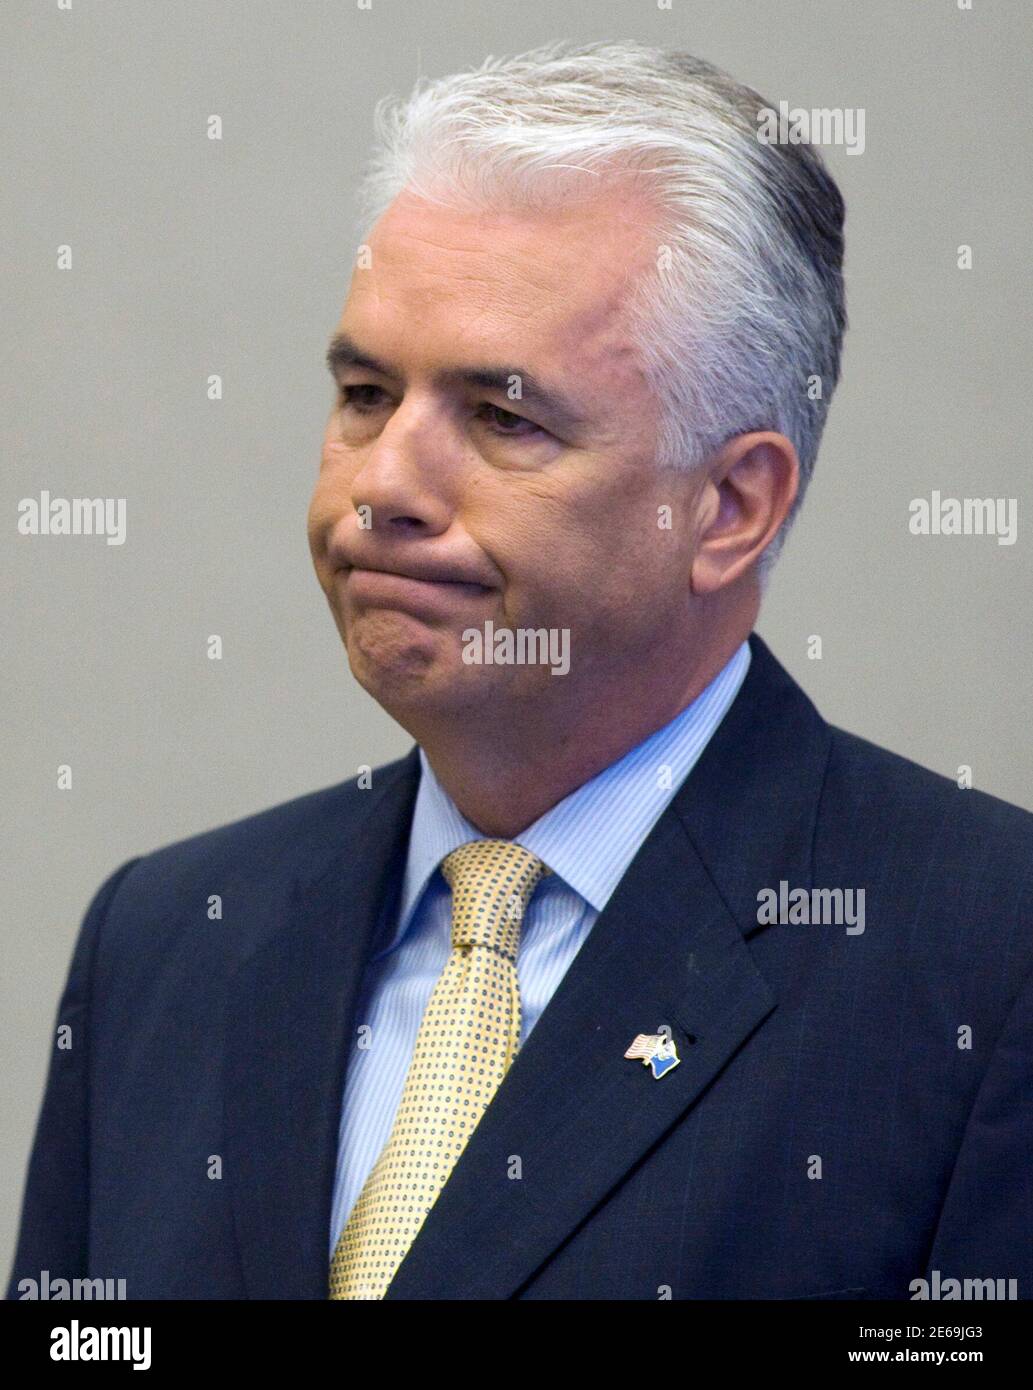 U.S. Senator John Ensign (R-NV) is seen as he announces he will not seek another term in 2012 during a news conference at the Lloyd George Federal Building in Las Vegas, Nevada, in this March 7, 2011 file photo. Ensign will resign from the U.S. Senate on May 3, he announced in a statement on April 21, 2011. REUTERS/Las Vegas Sun/Steve Marcus/Files (UNITED STATES - Tags: POLITICS HEADSHOT) Stock Photo